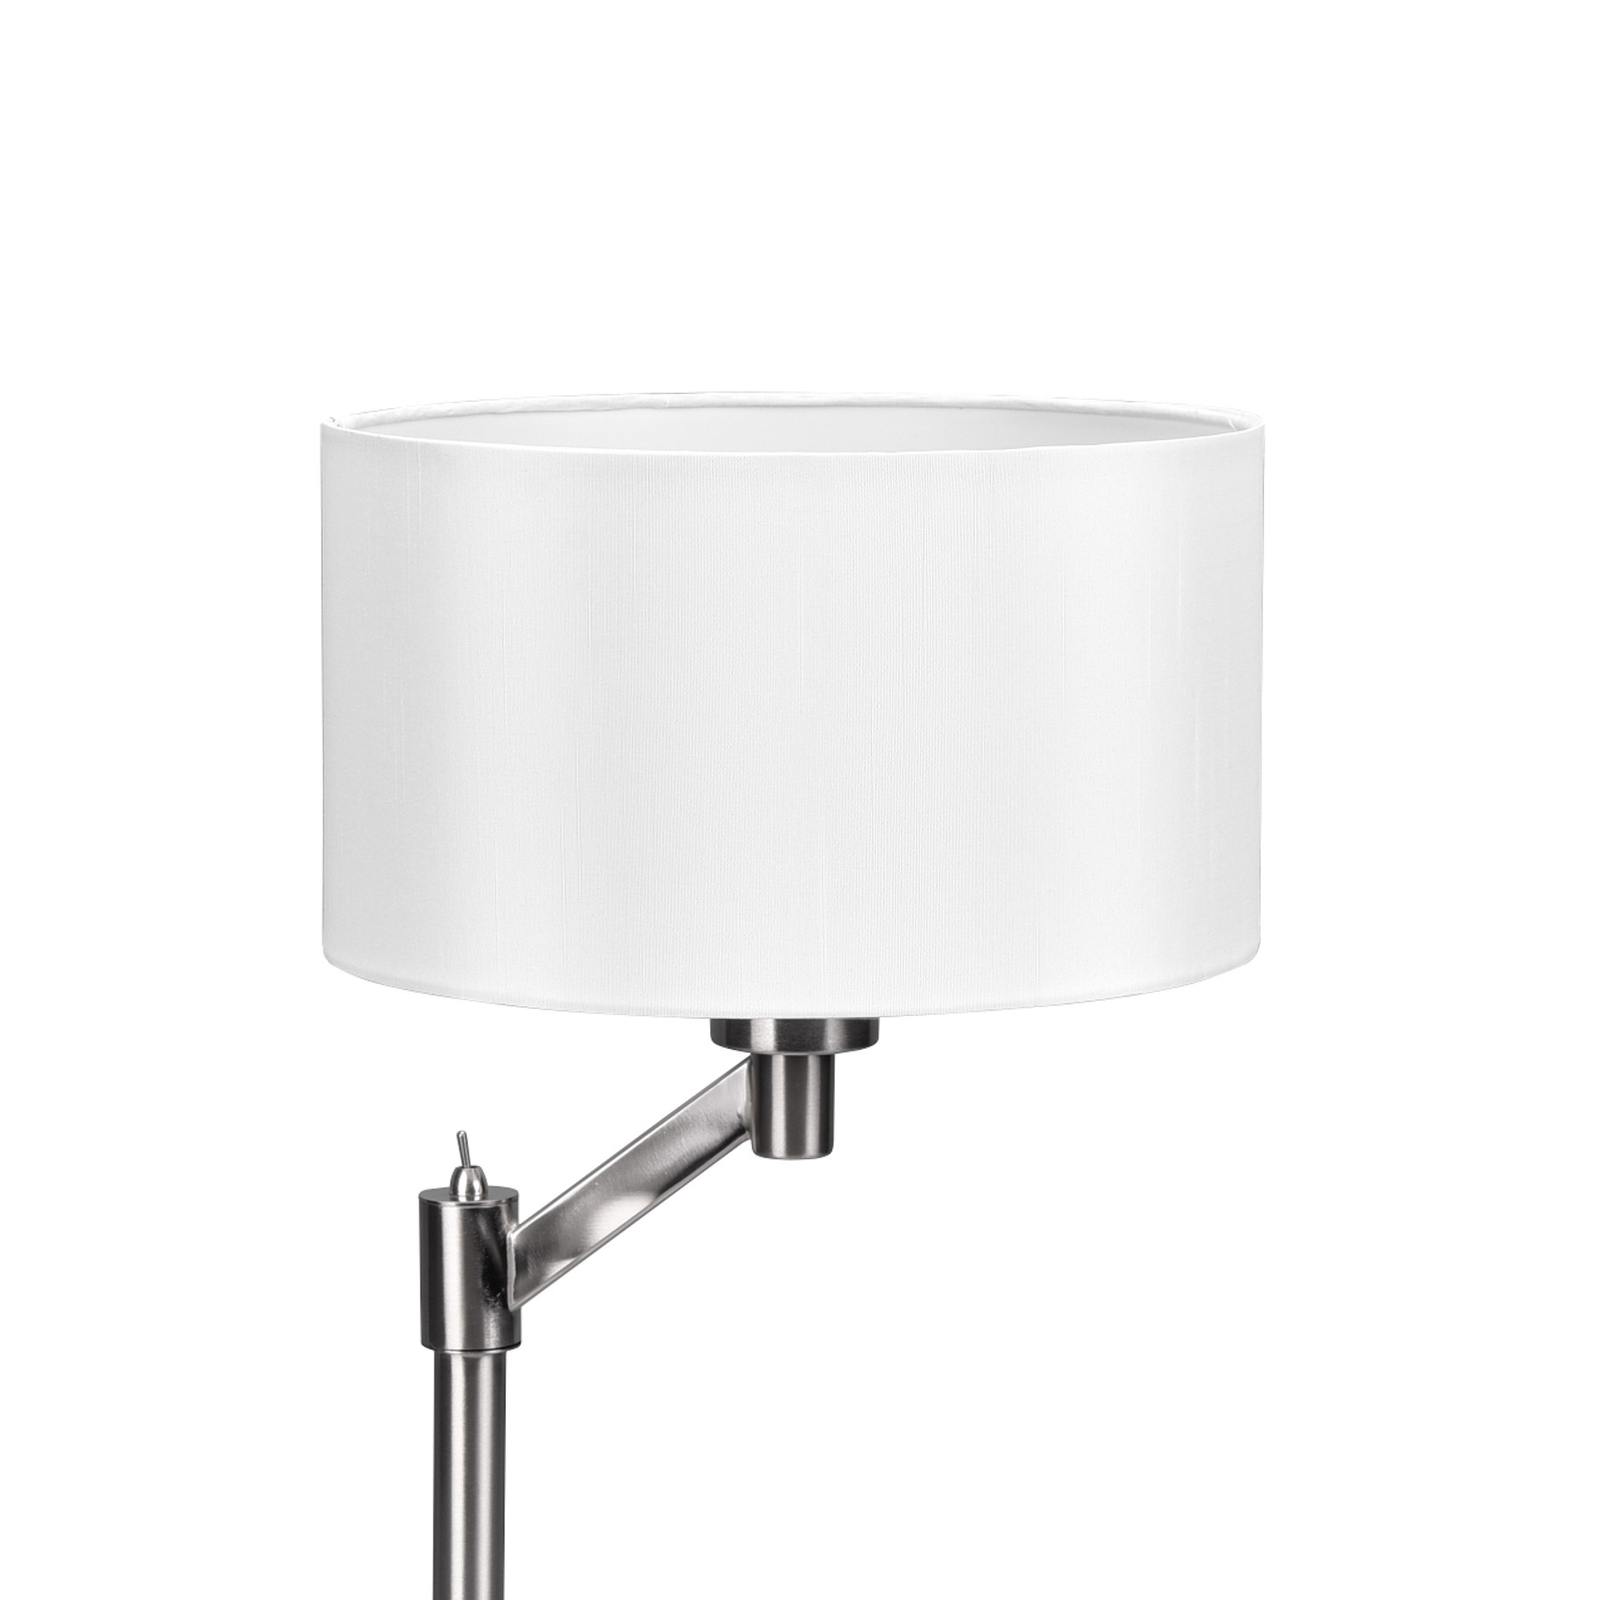 Cassio table lamp with fabric shade, nickel